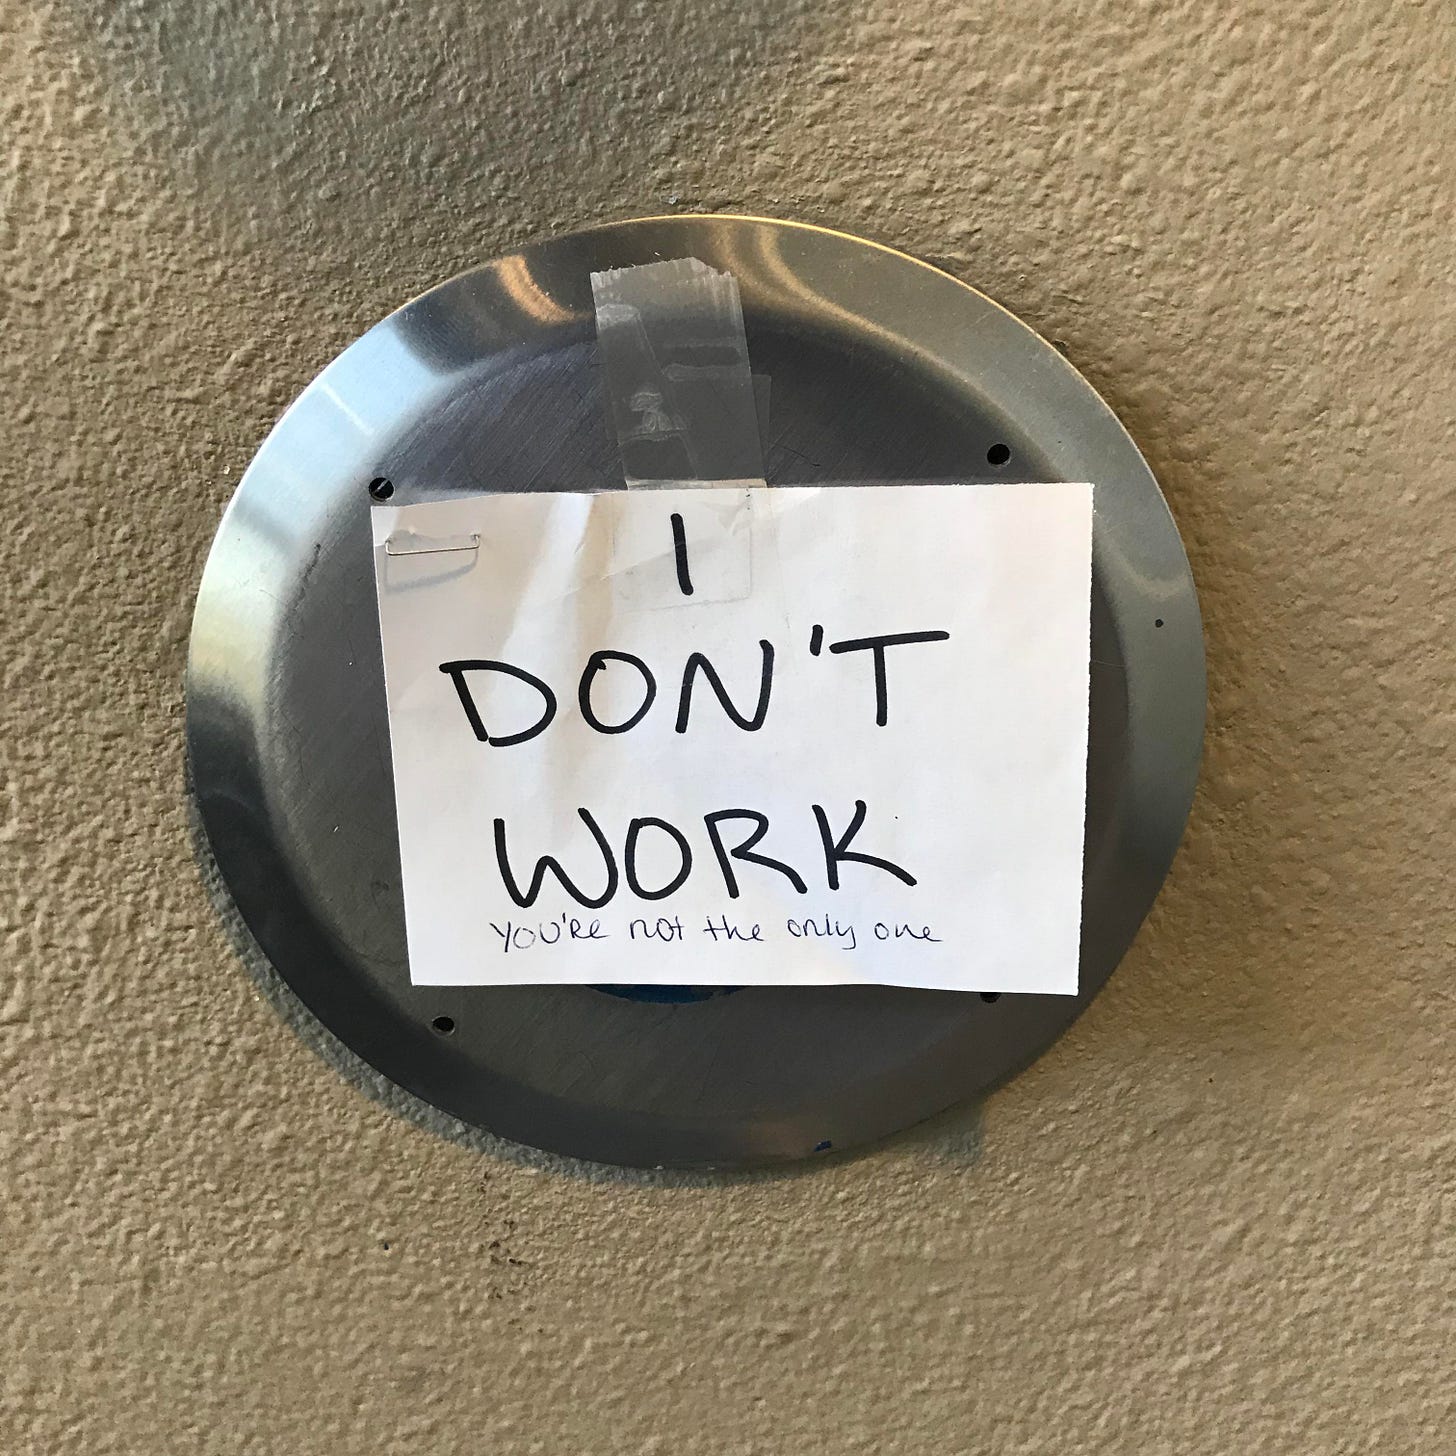 A door button with a piece of paper taped over it that says "I DON'T WORK" in marker. Written underneath it in different, smaller handwriting are the words "You're not the only one."